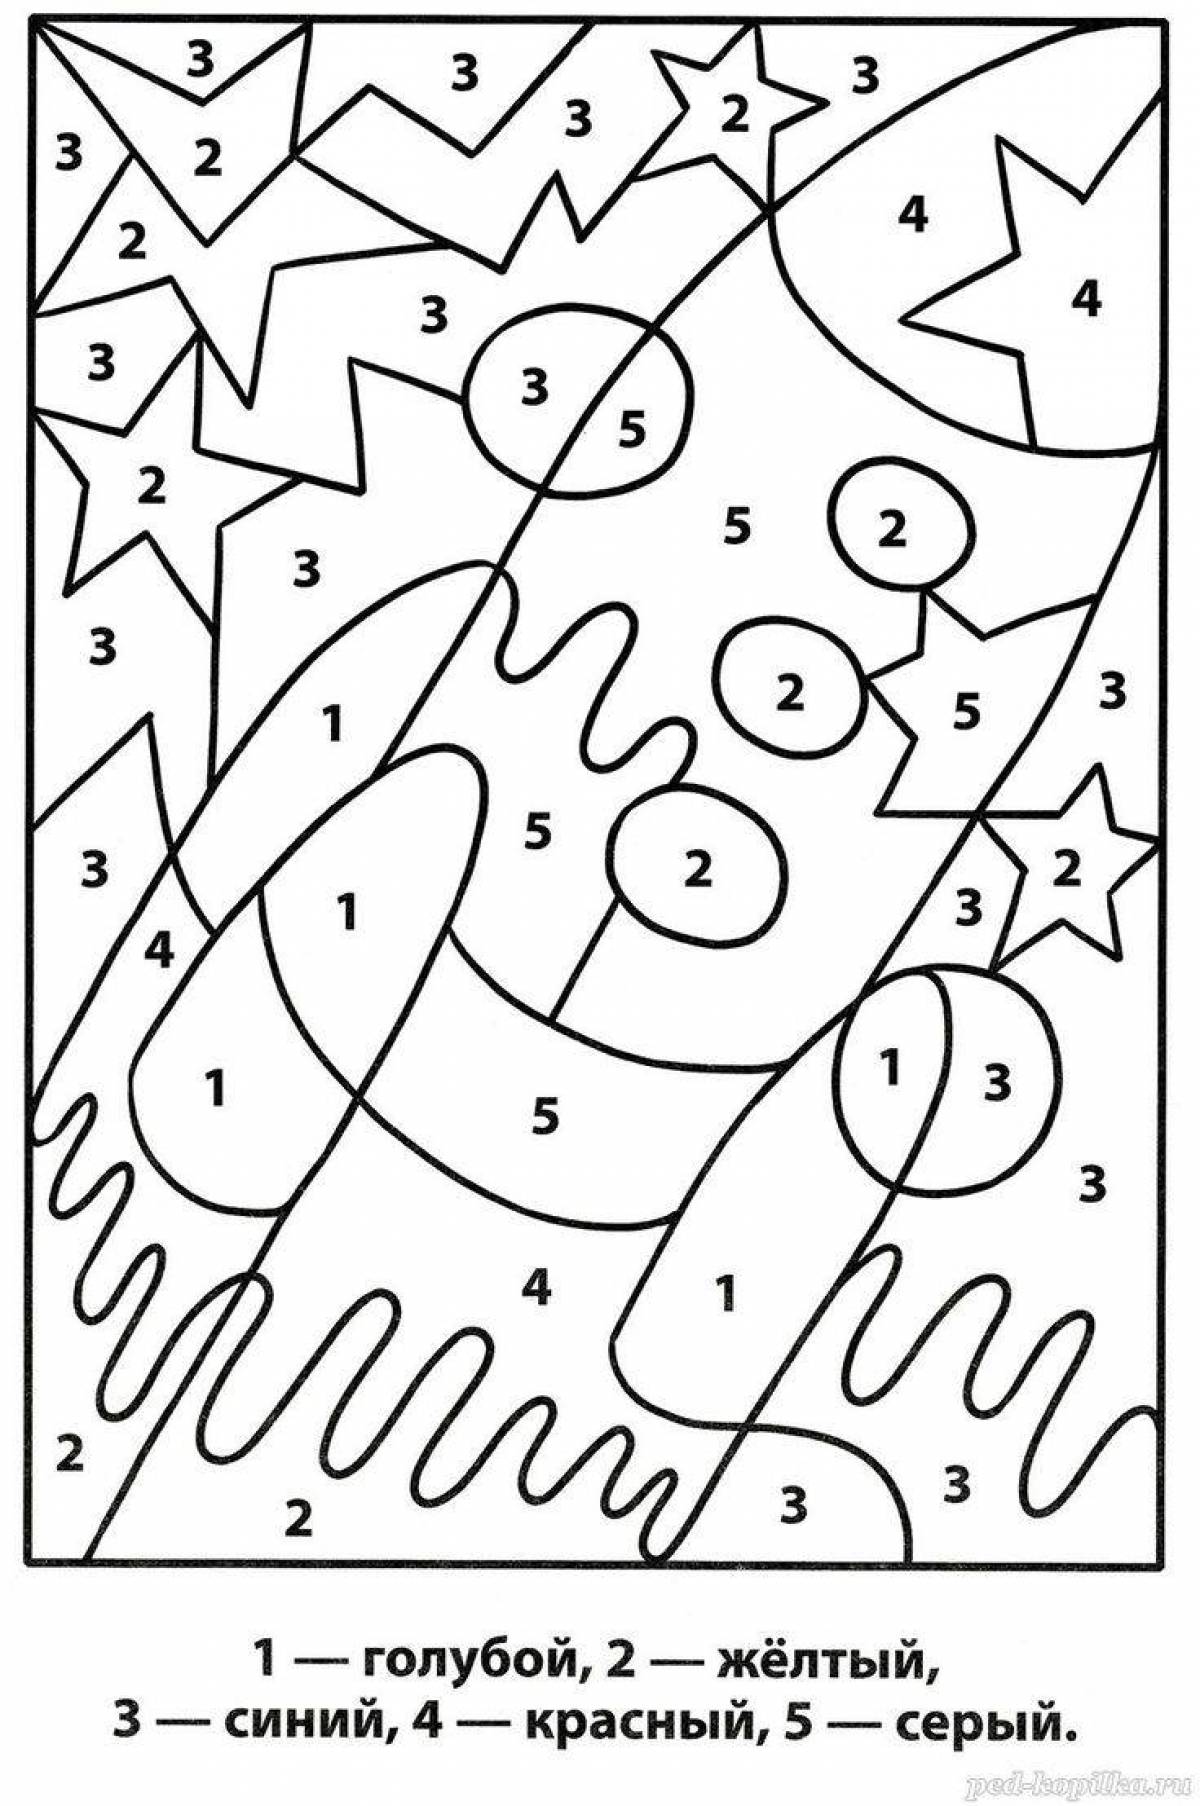 Fun coloring by numbers for kids 6-7 years old